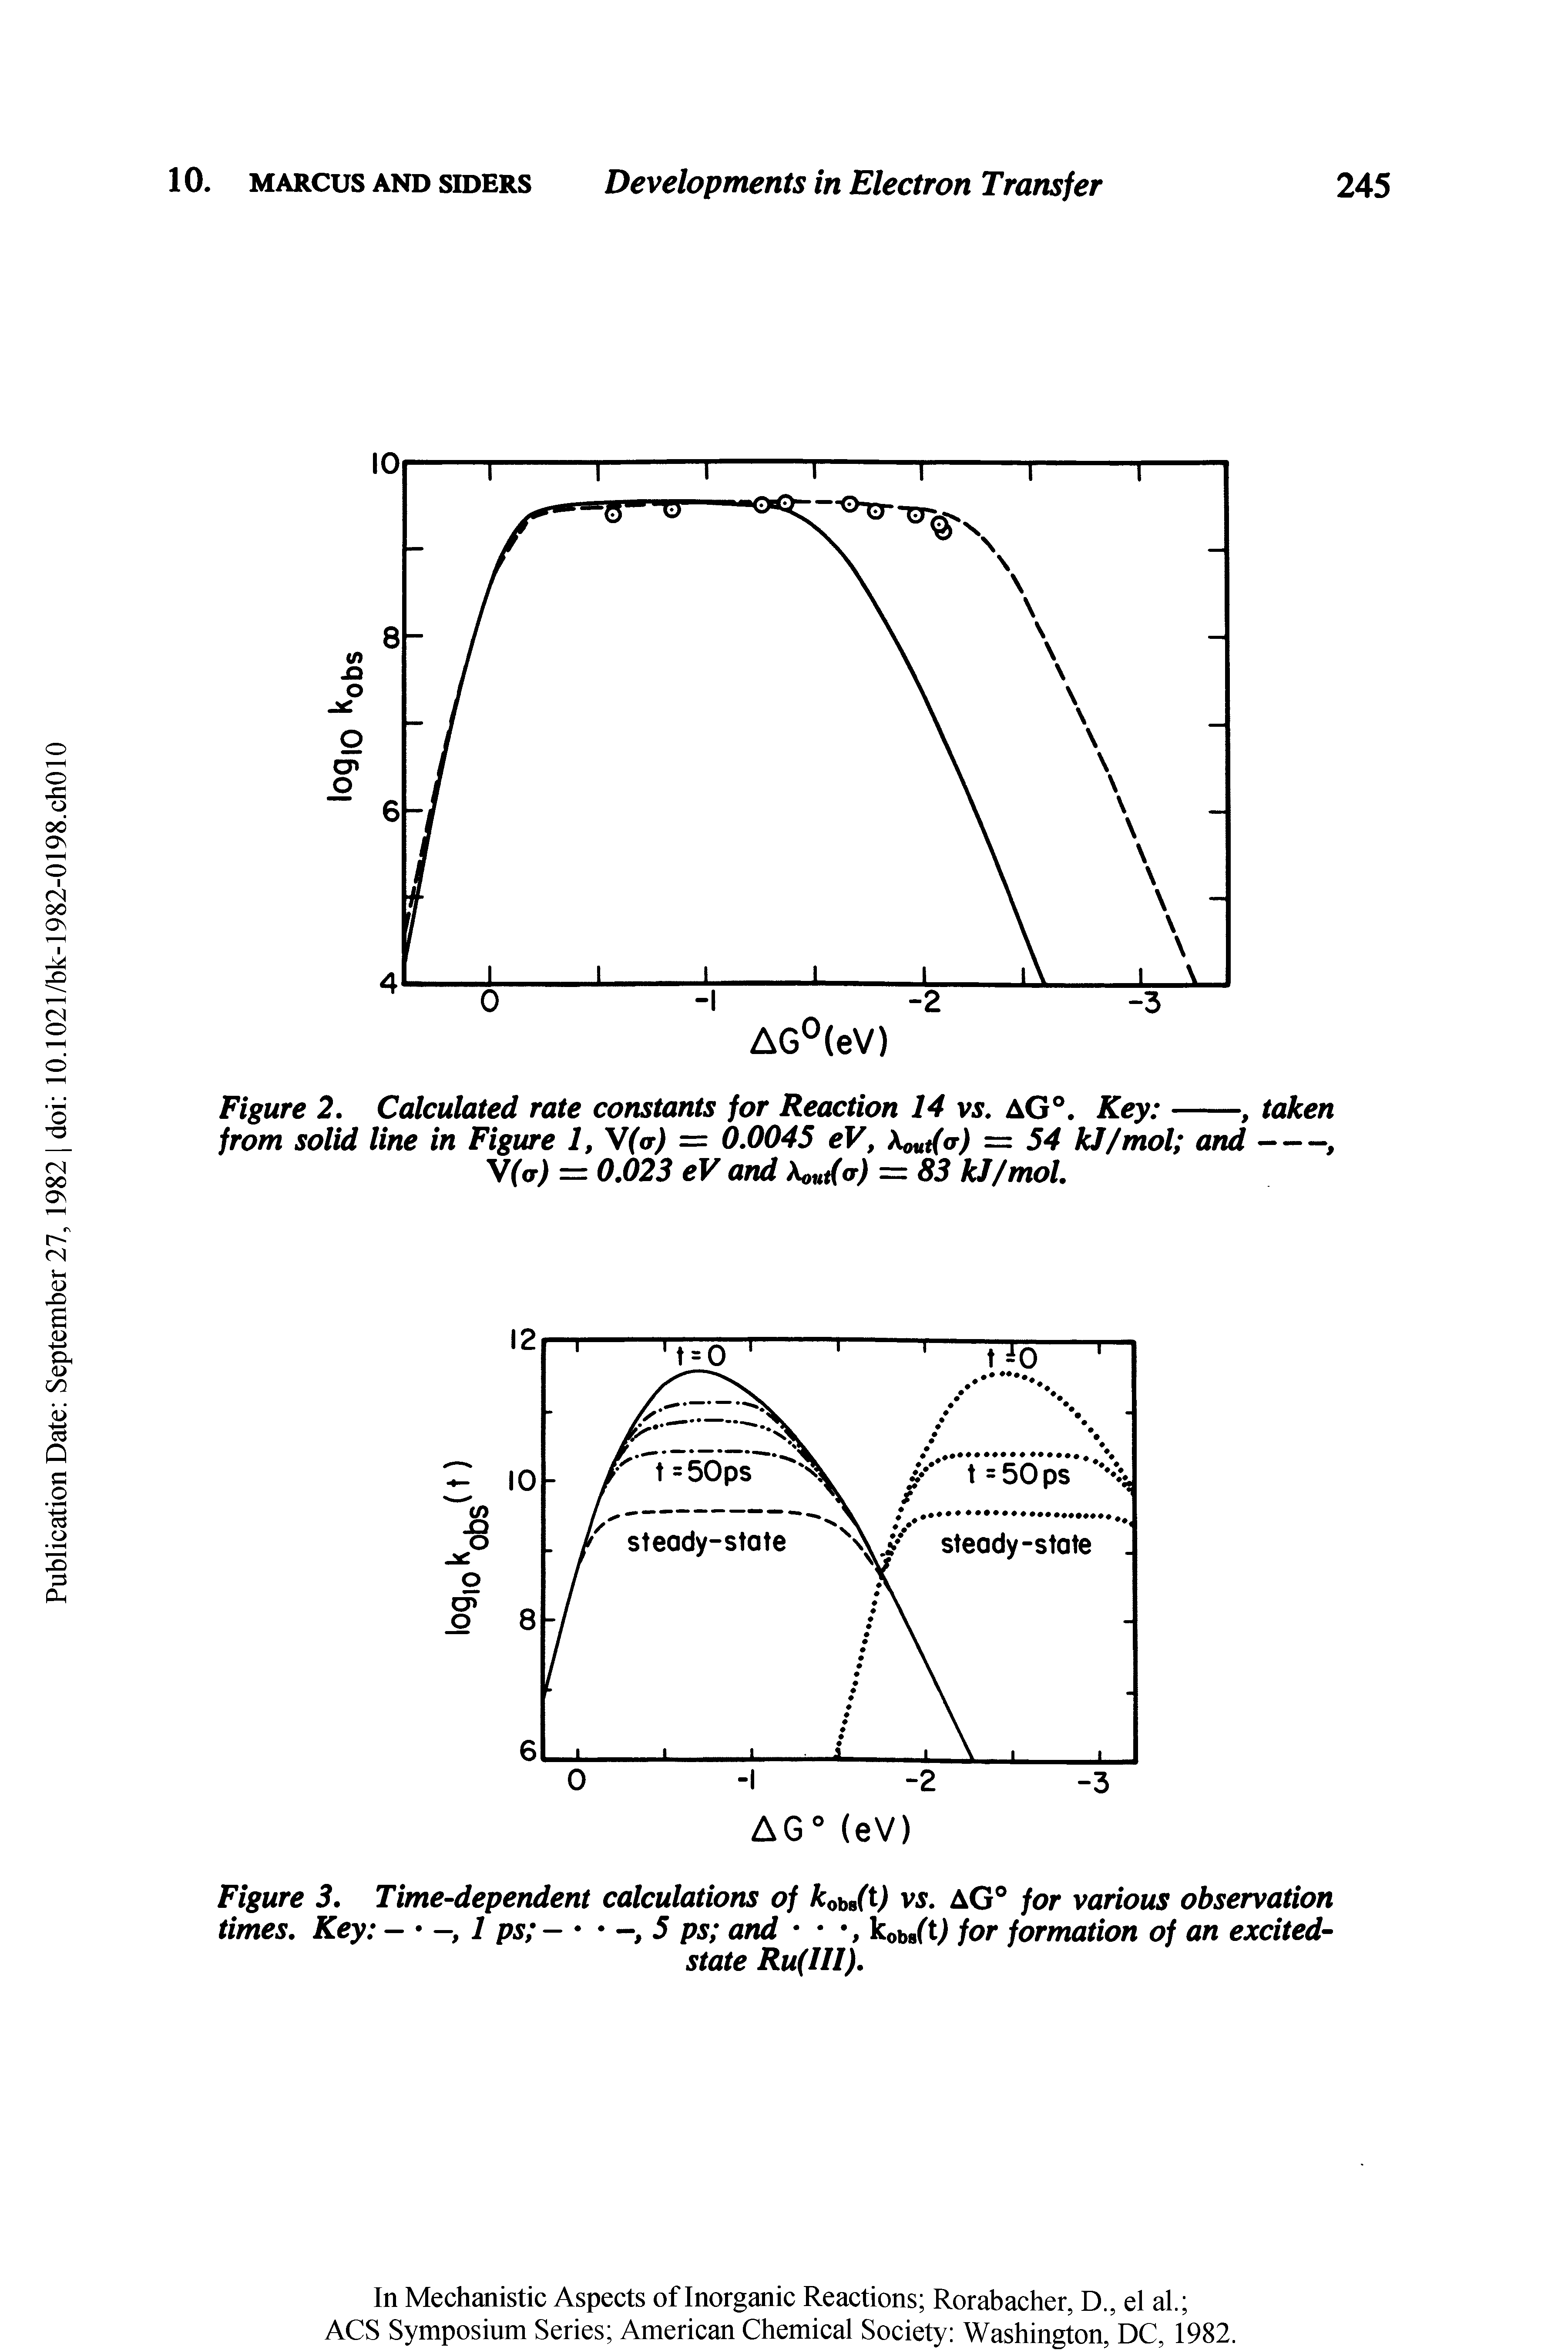 Figure 3. Time-dependent calculations of kobB(t) vs. AG° for various observation times. Key - 1 ps - 5 ps and , kobsft) for formation of an excited-...